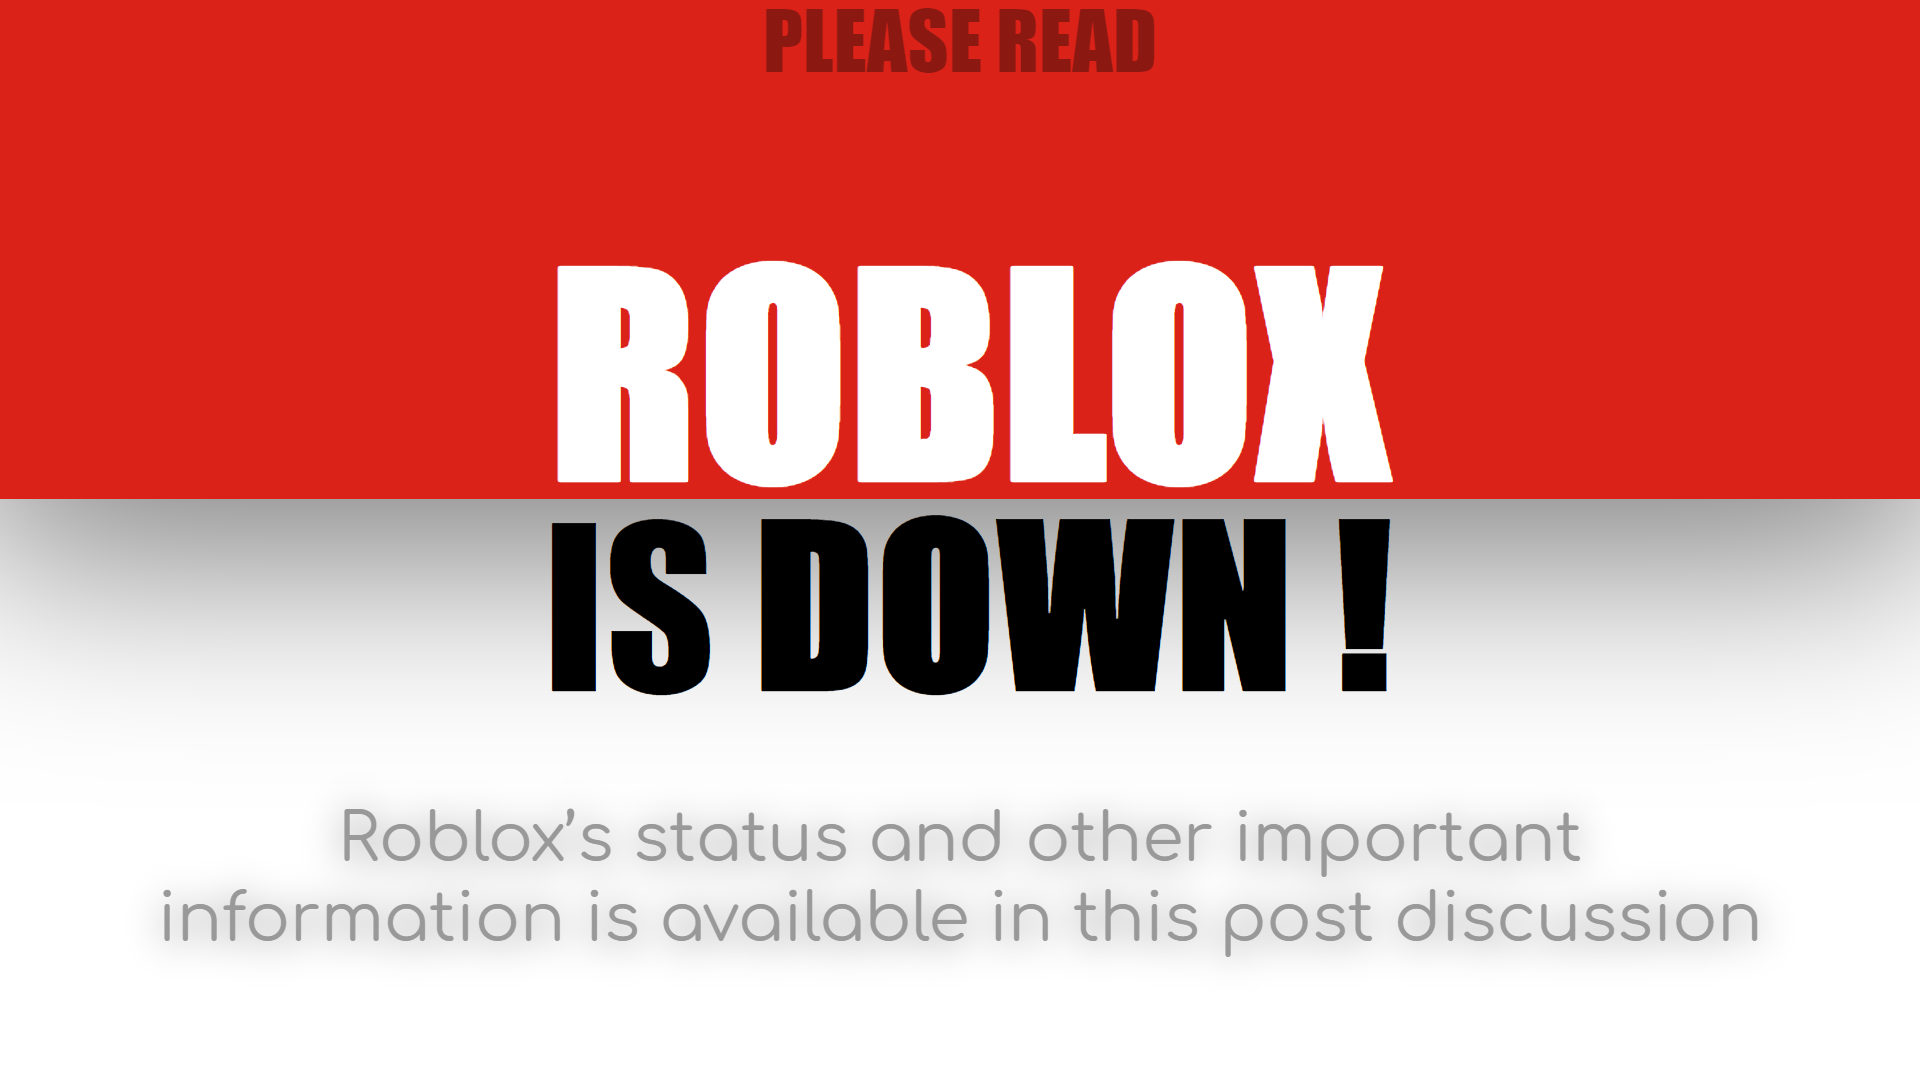 Pov: ROBLOX is down and this is how the wiki acts